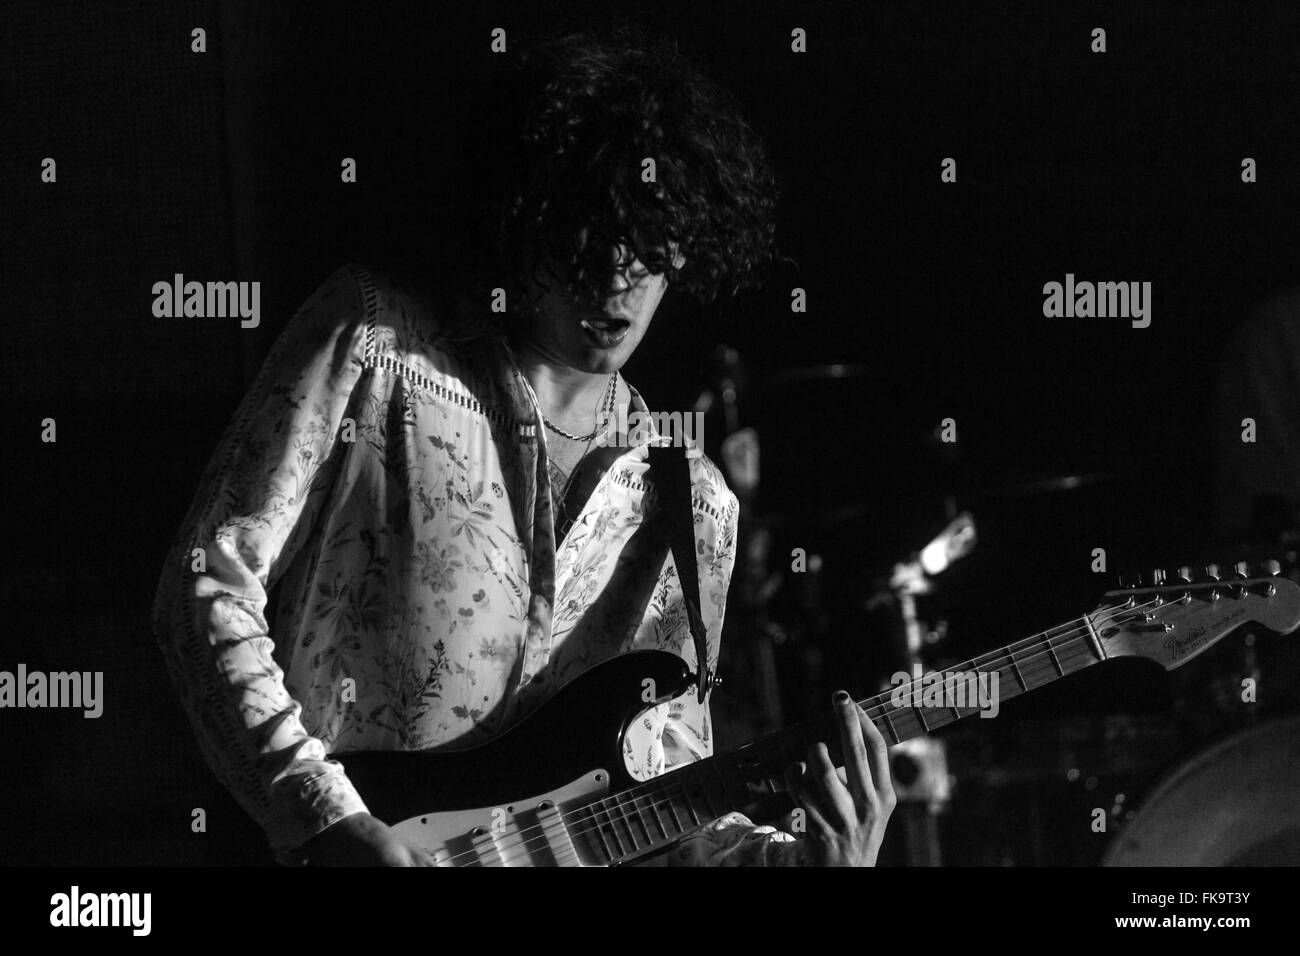 London, UK, 7th March 2016. The 1975 Live Performance at o2 Brixton Academy. © Robert Stainforth/Alamy Live News Stock Photo